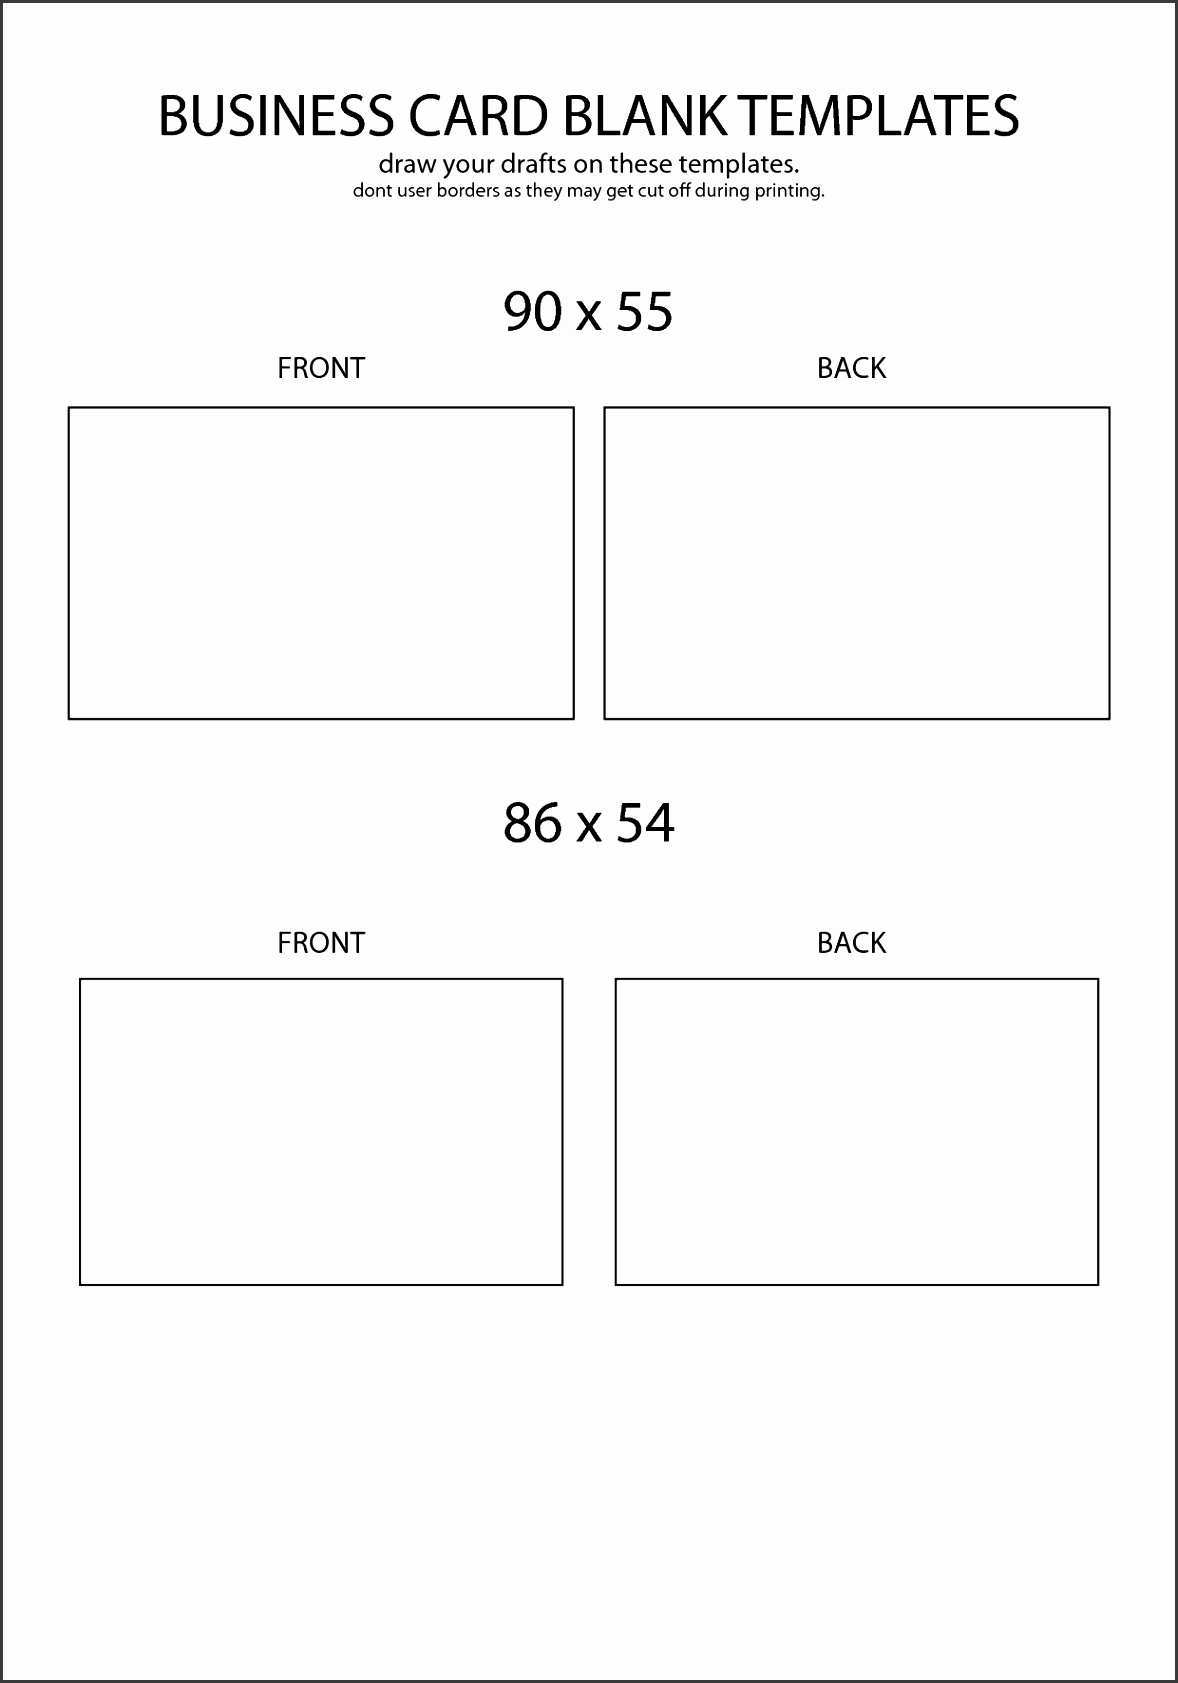 8 Blank Business Card Template Word 2013 - Sampletemplatess Throughout Plain Business Card Template Microsoft Word